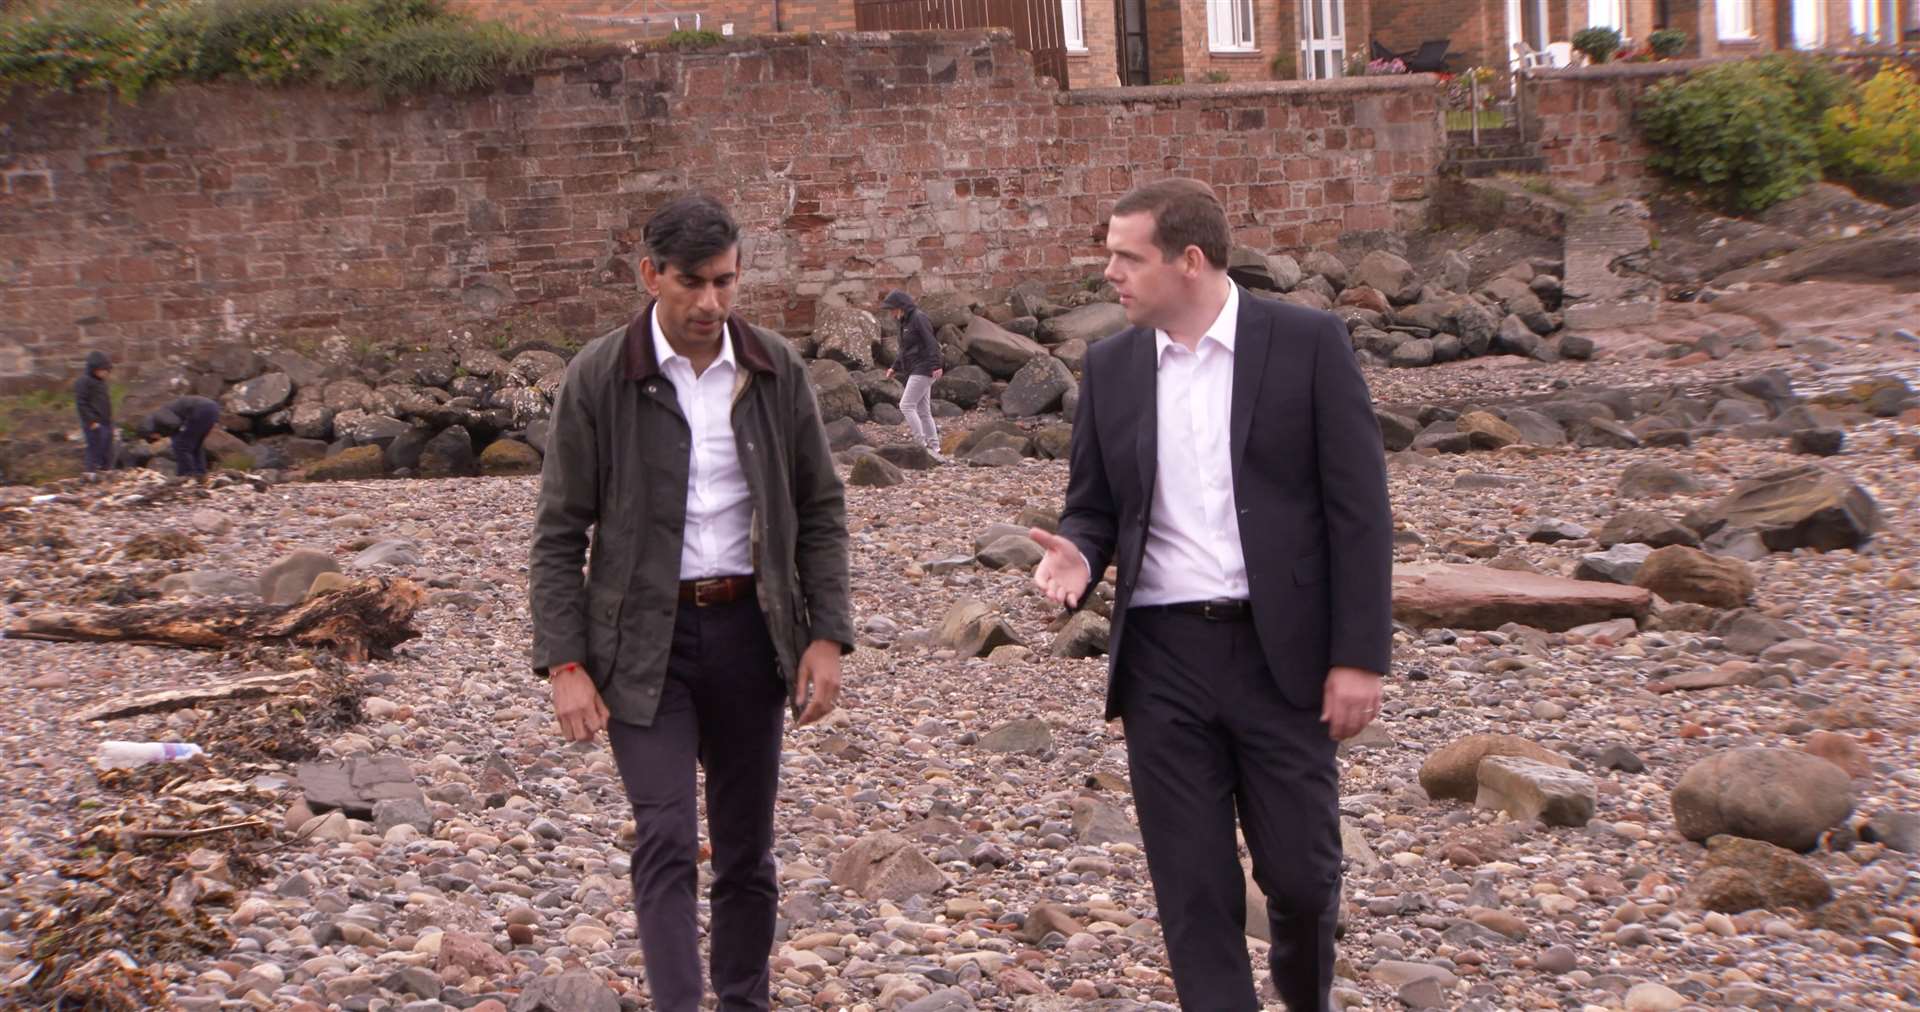 Moray MP and Scots Tory leader Douglas Ross with Chancellor of the Exchequer Rishni Sunak to Scotland. Picture: Moray Conservatives